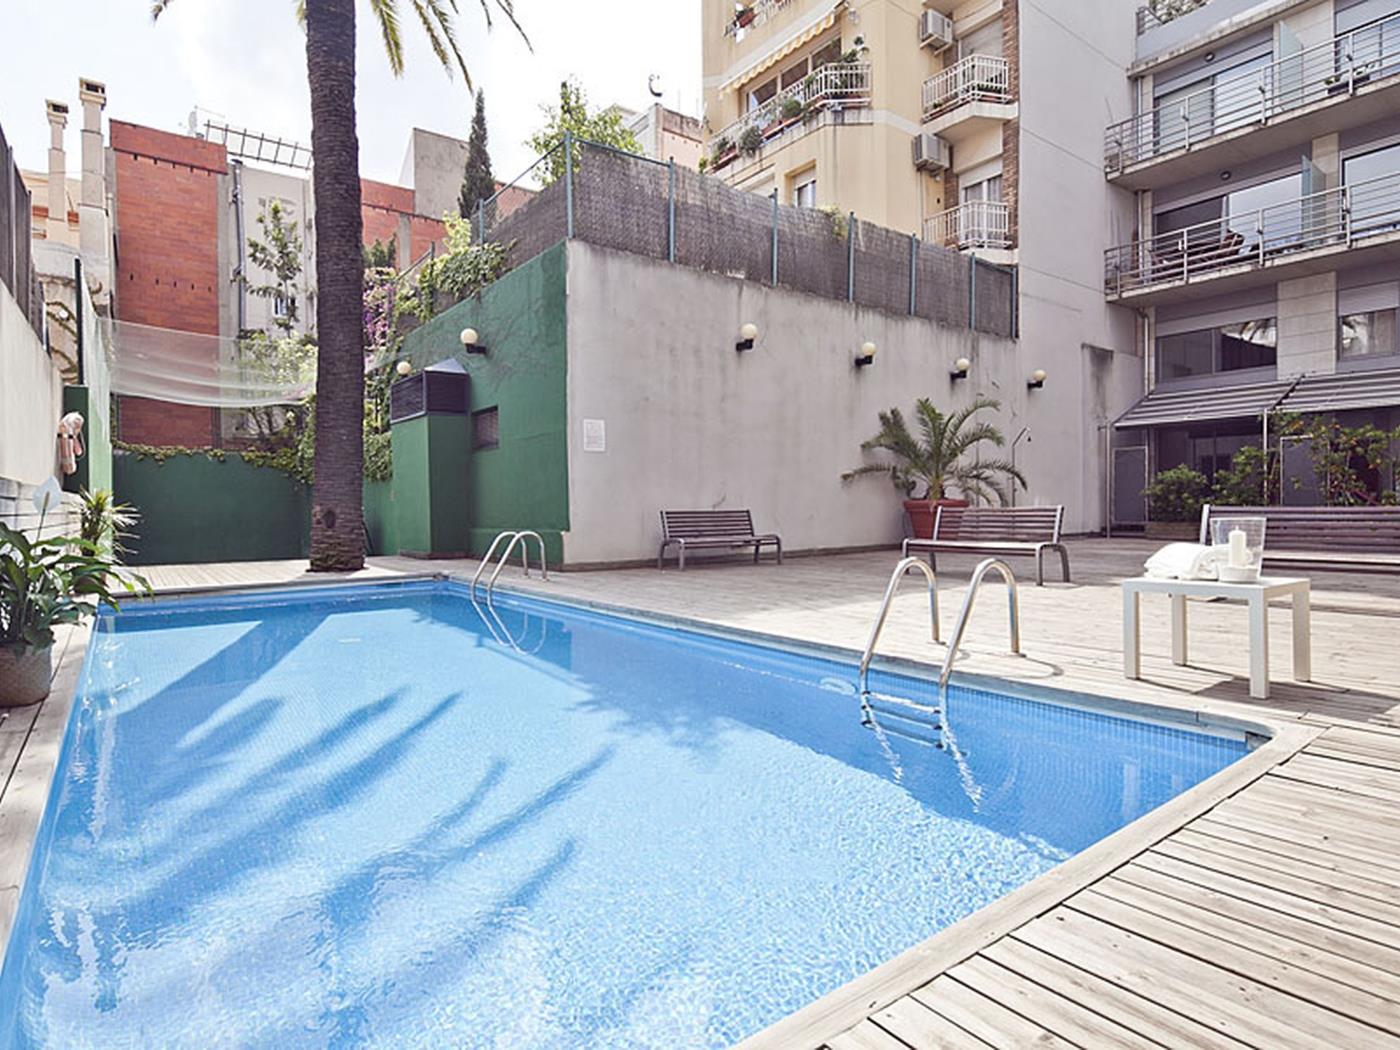 Apartments for rent for Erasmus very close to the centre of Barcelona wt terrace - My Space Barcelona Apartments